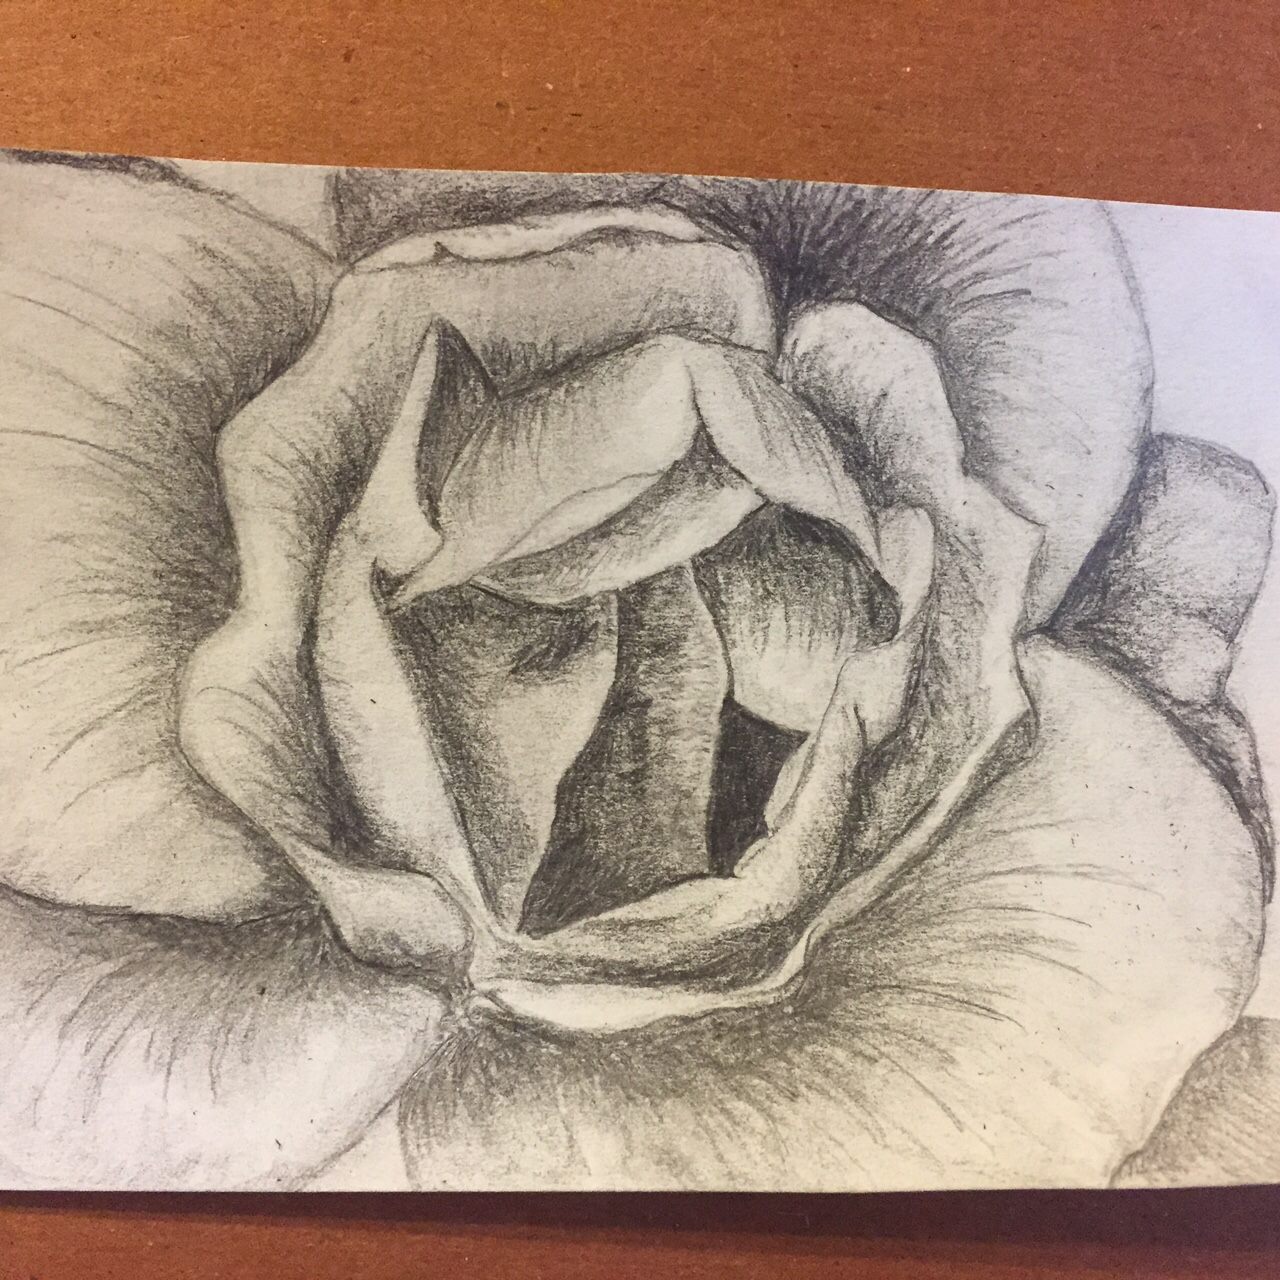 drawing of a flower